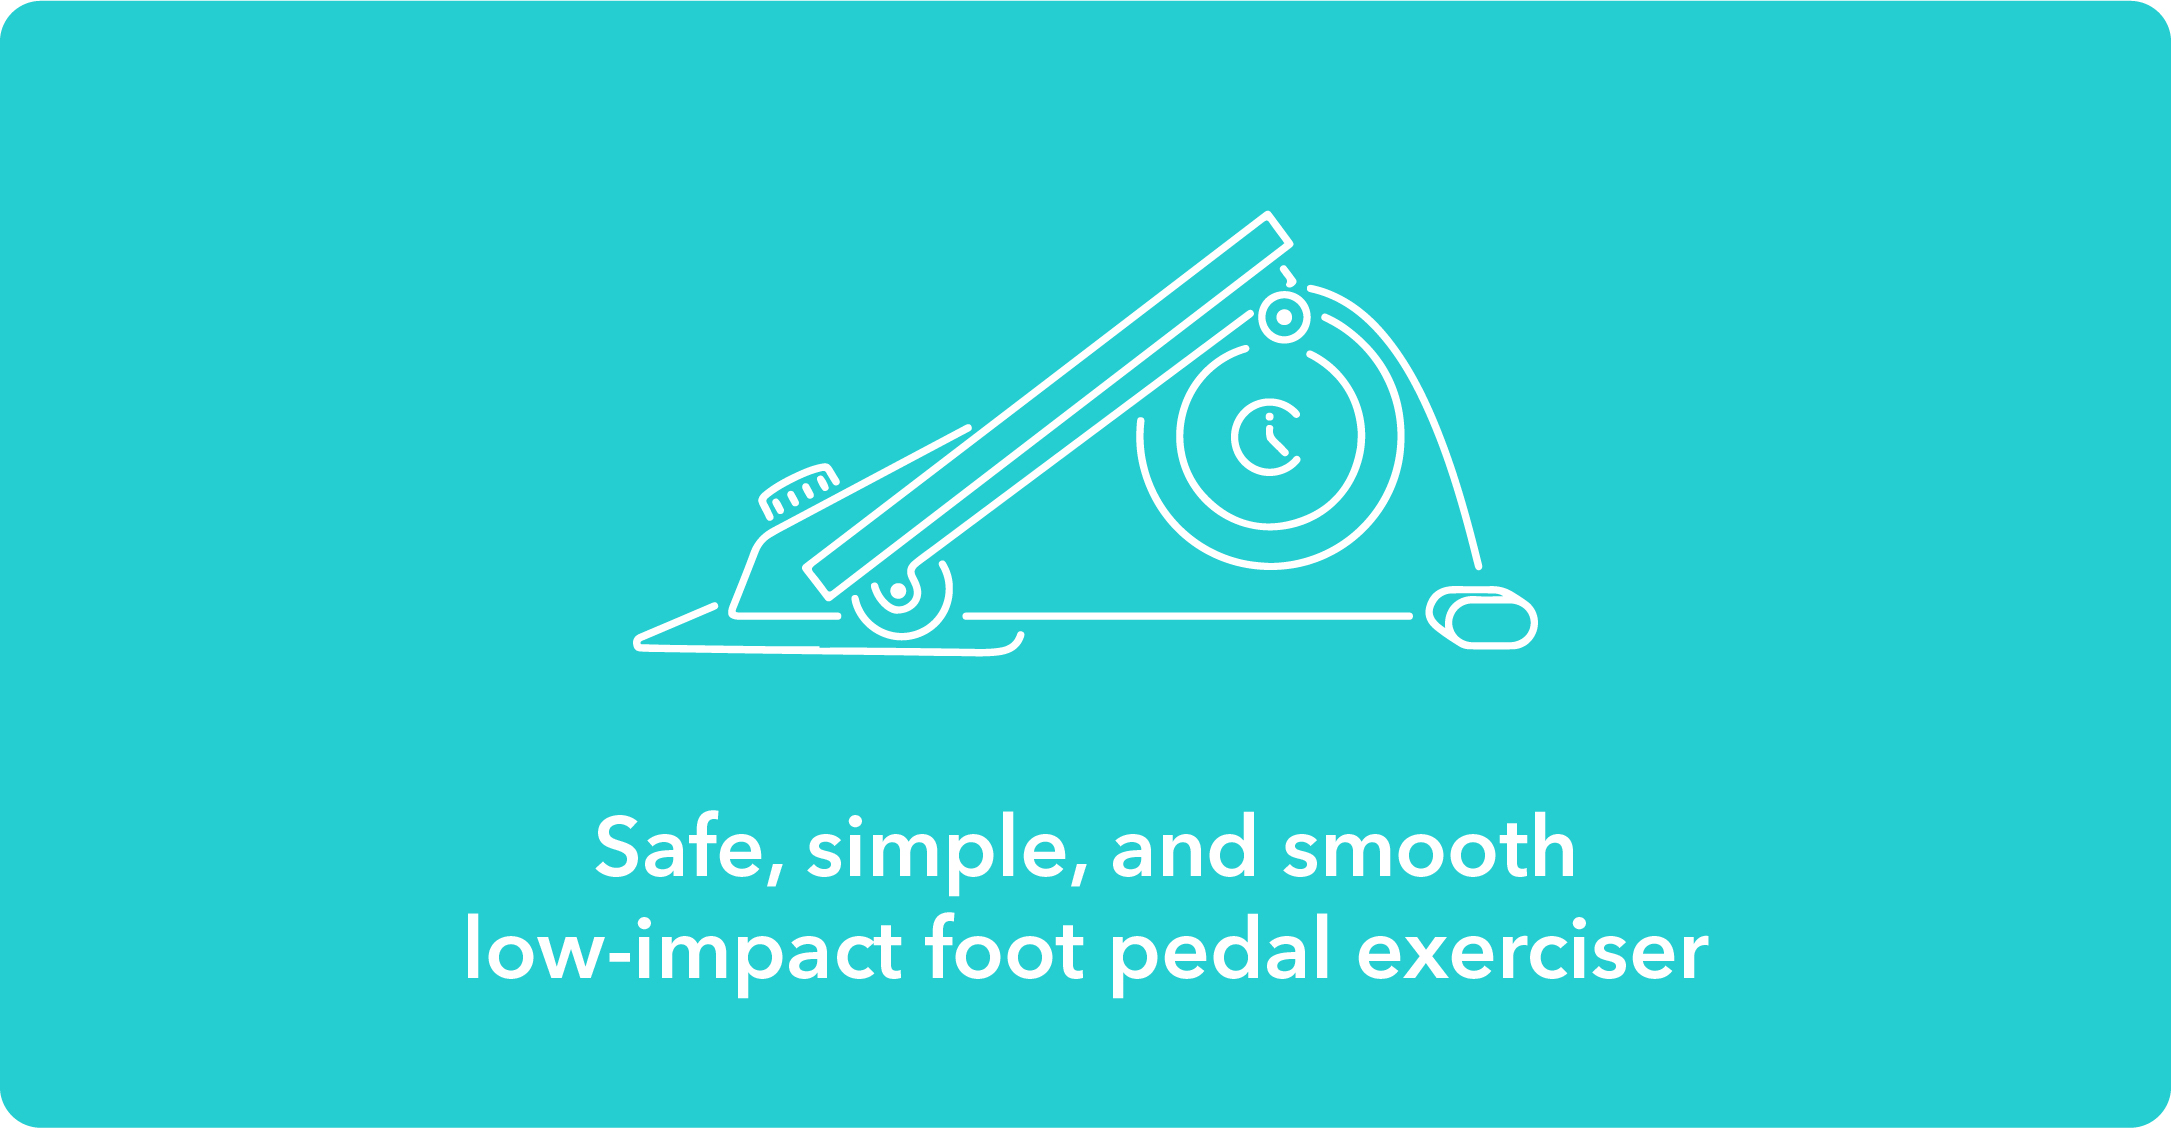 Safe, simple, and smooth low-impact foot pedal exerciser